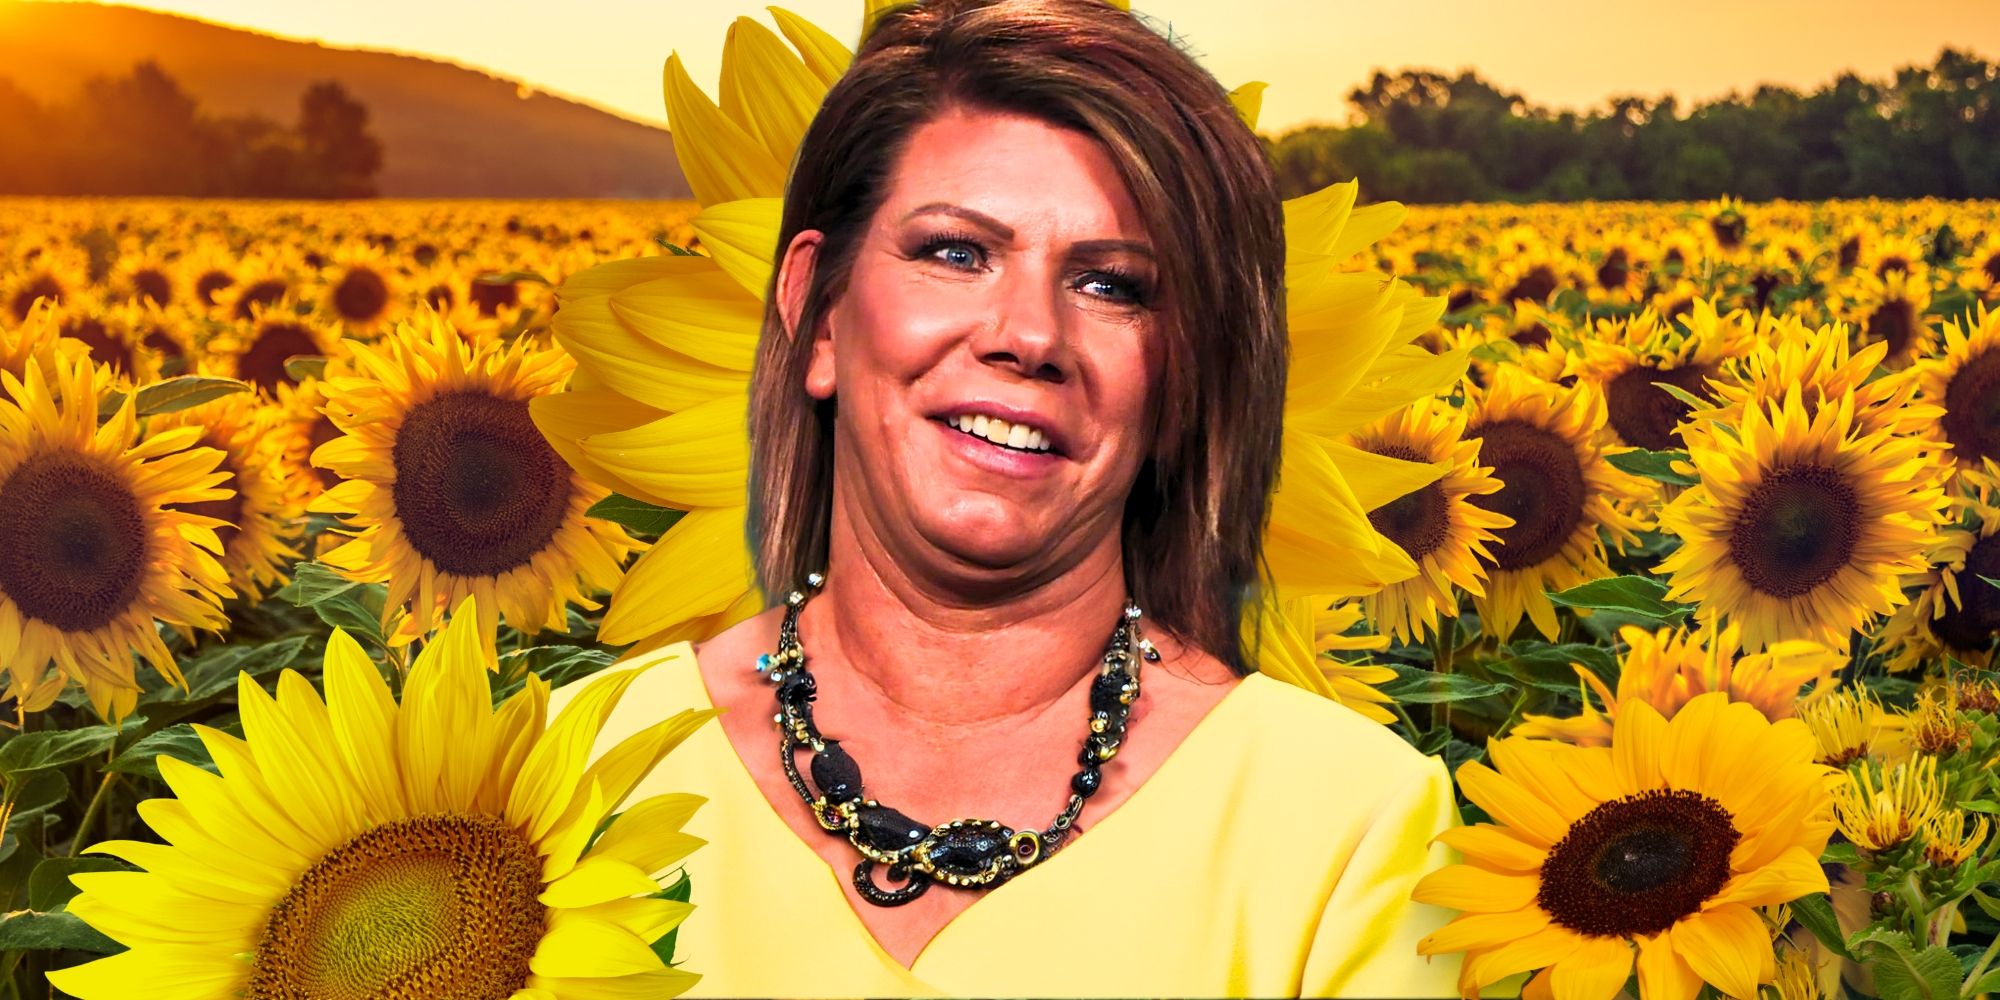 Sister Wives Meri Brown in yellow outfit smiling with field of sunflowers in background